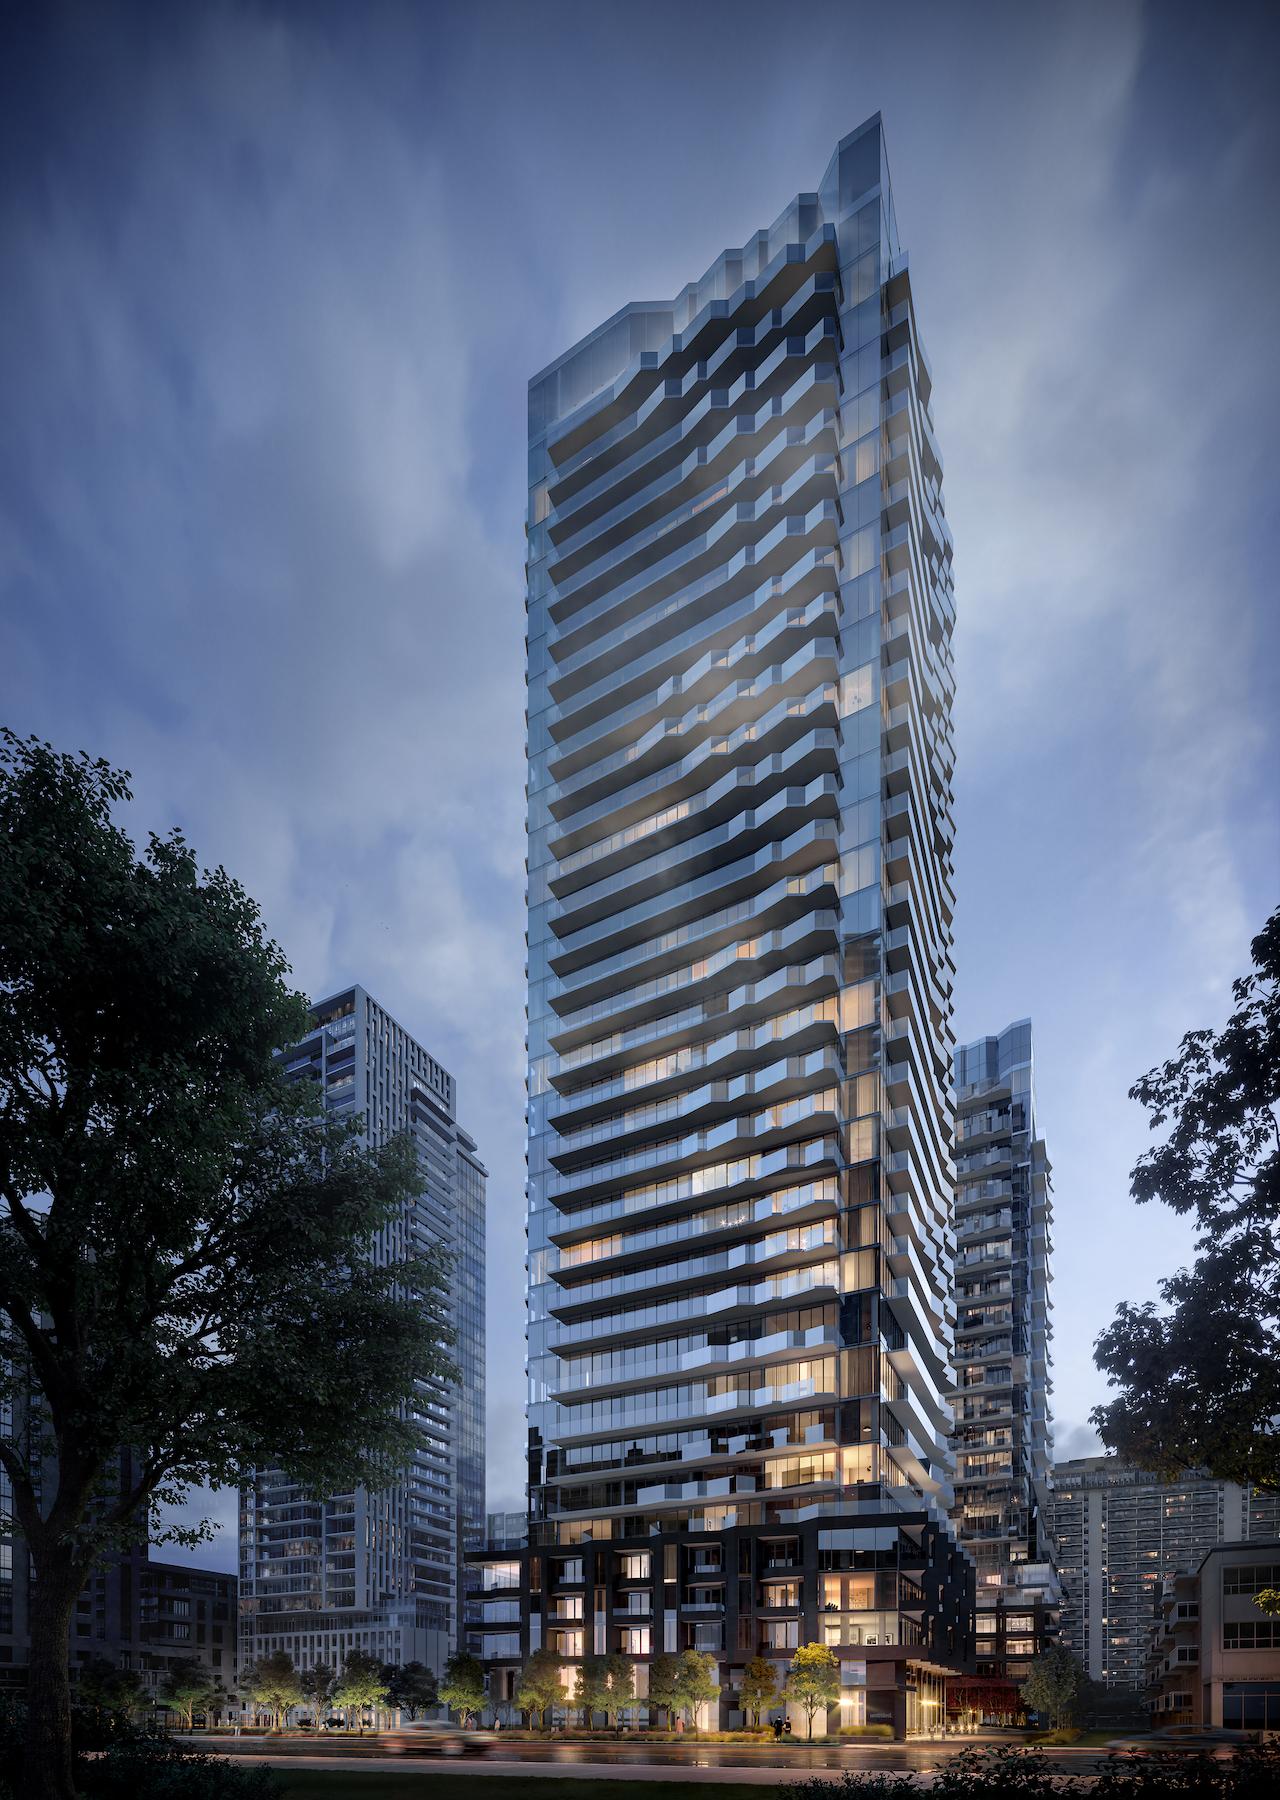 Untitled Toronto, designed by IBI Group with Pharrell Williams for Reserve Properties and Westdale Properties